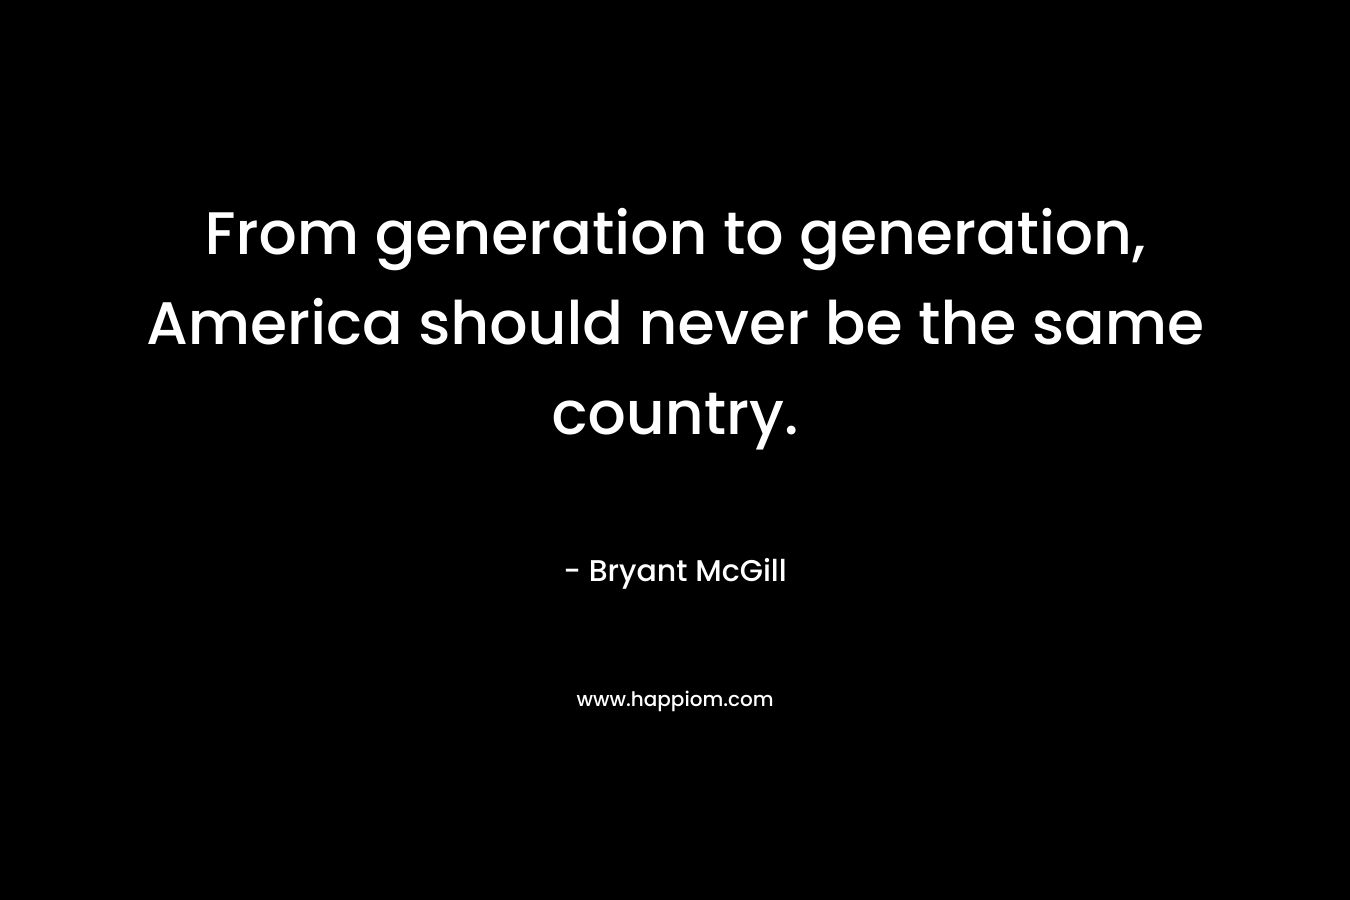 From generation to generation, America should never be the same country. – Bryant McGill